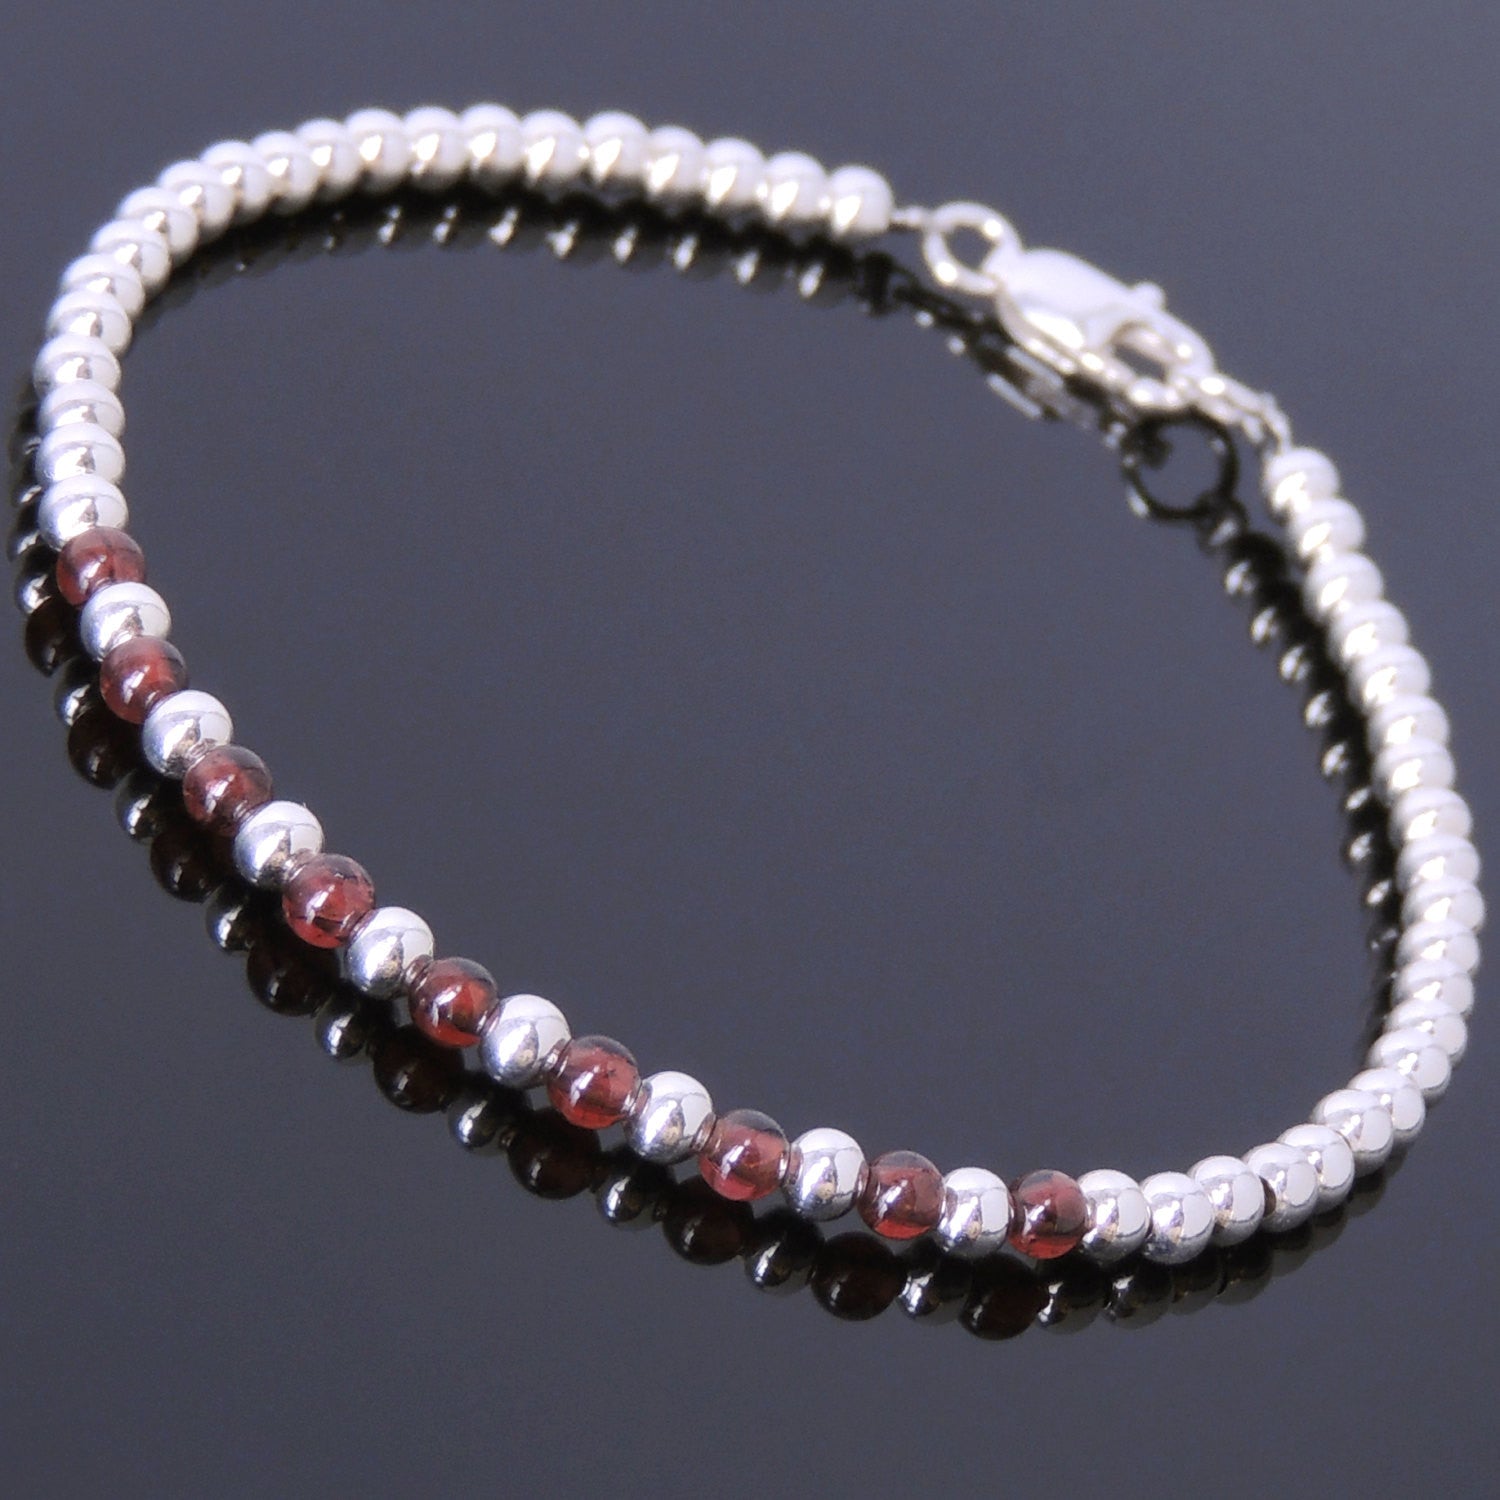 3mm Grade AAA Garnet Healing Gemstone Anklet with 3mm S925 Sterling Silver Spacer Beads & Clasp - Handmade by Gem & Silver AN022